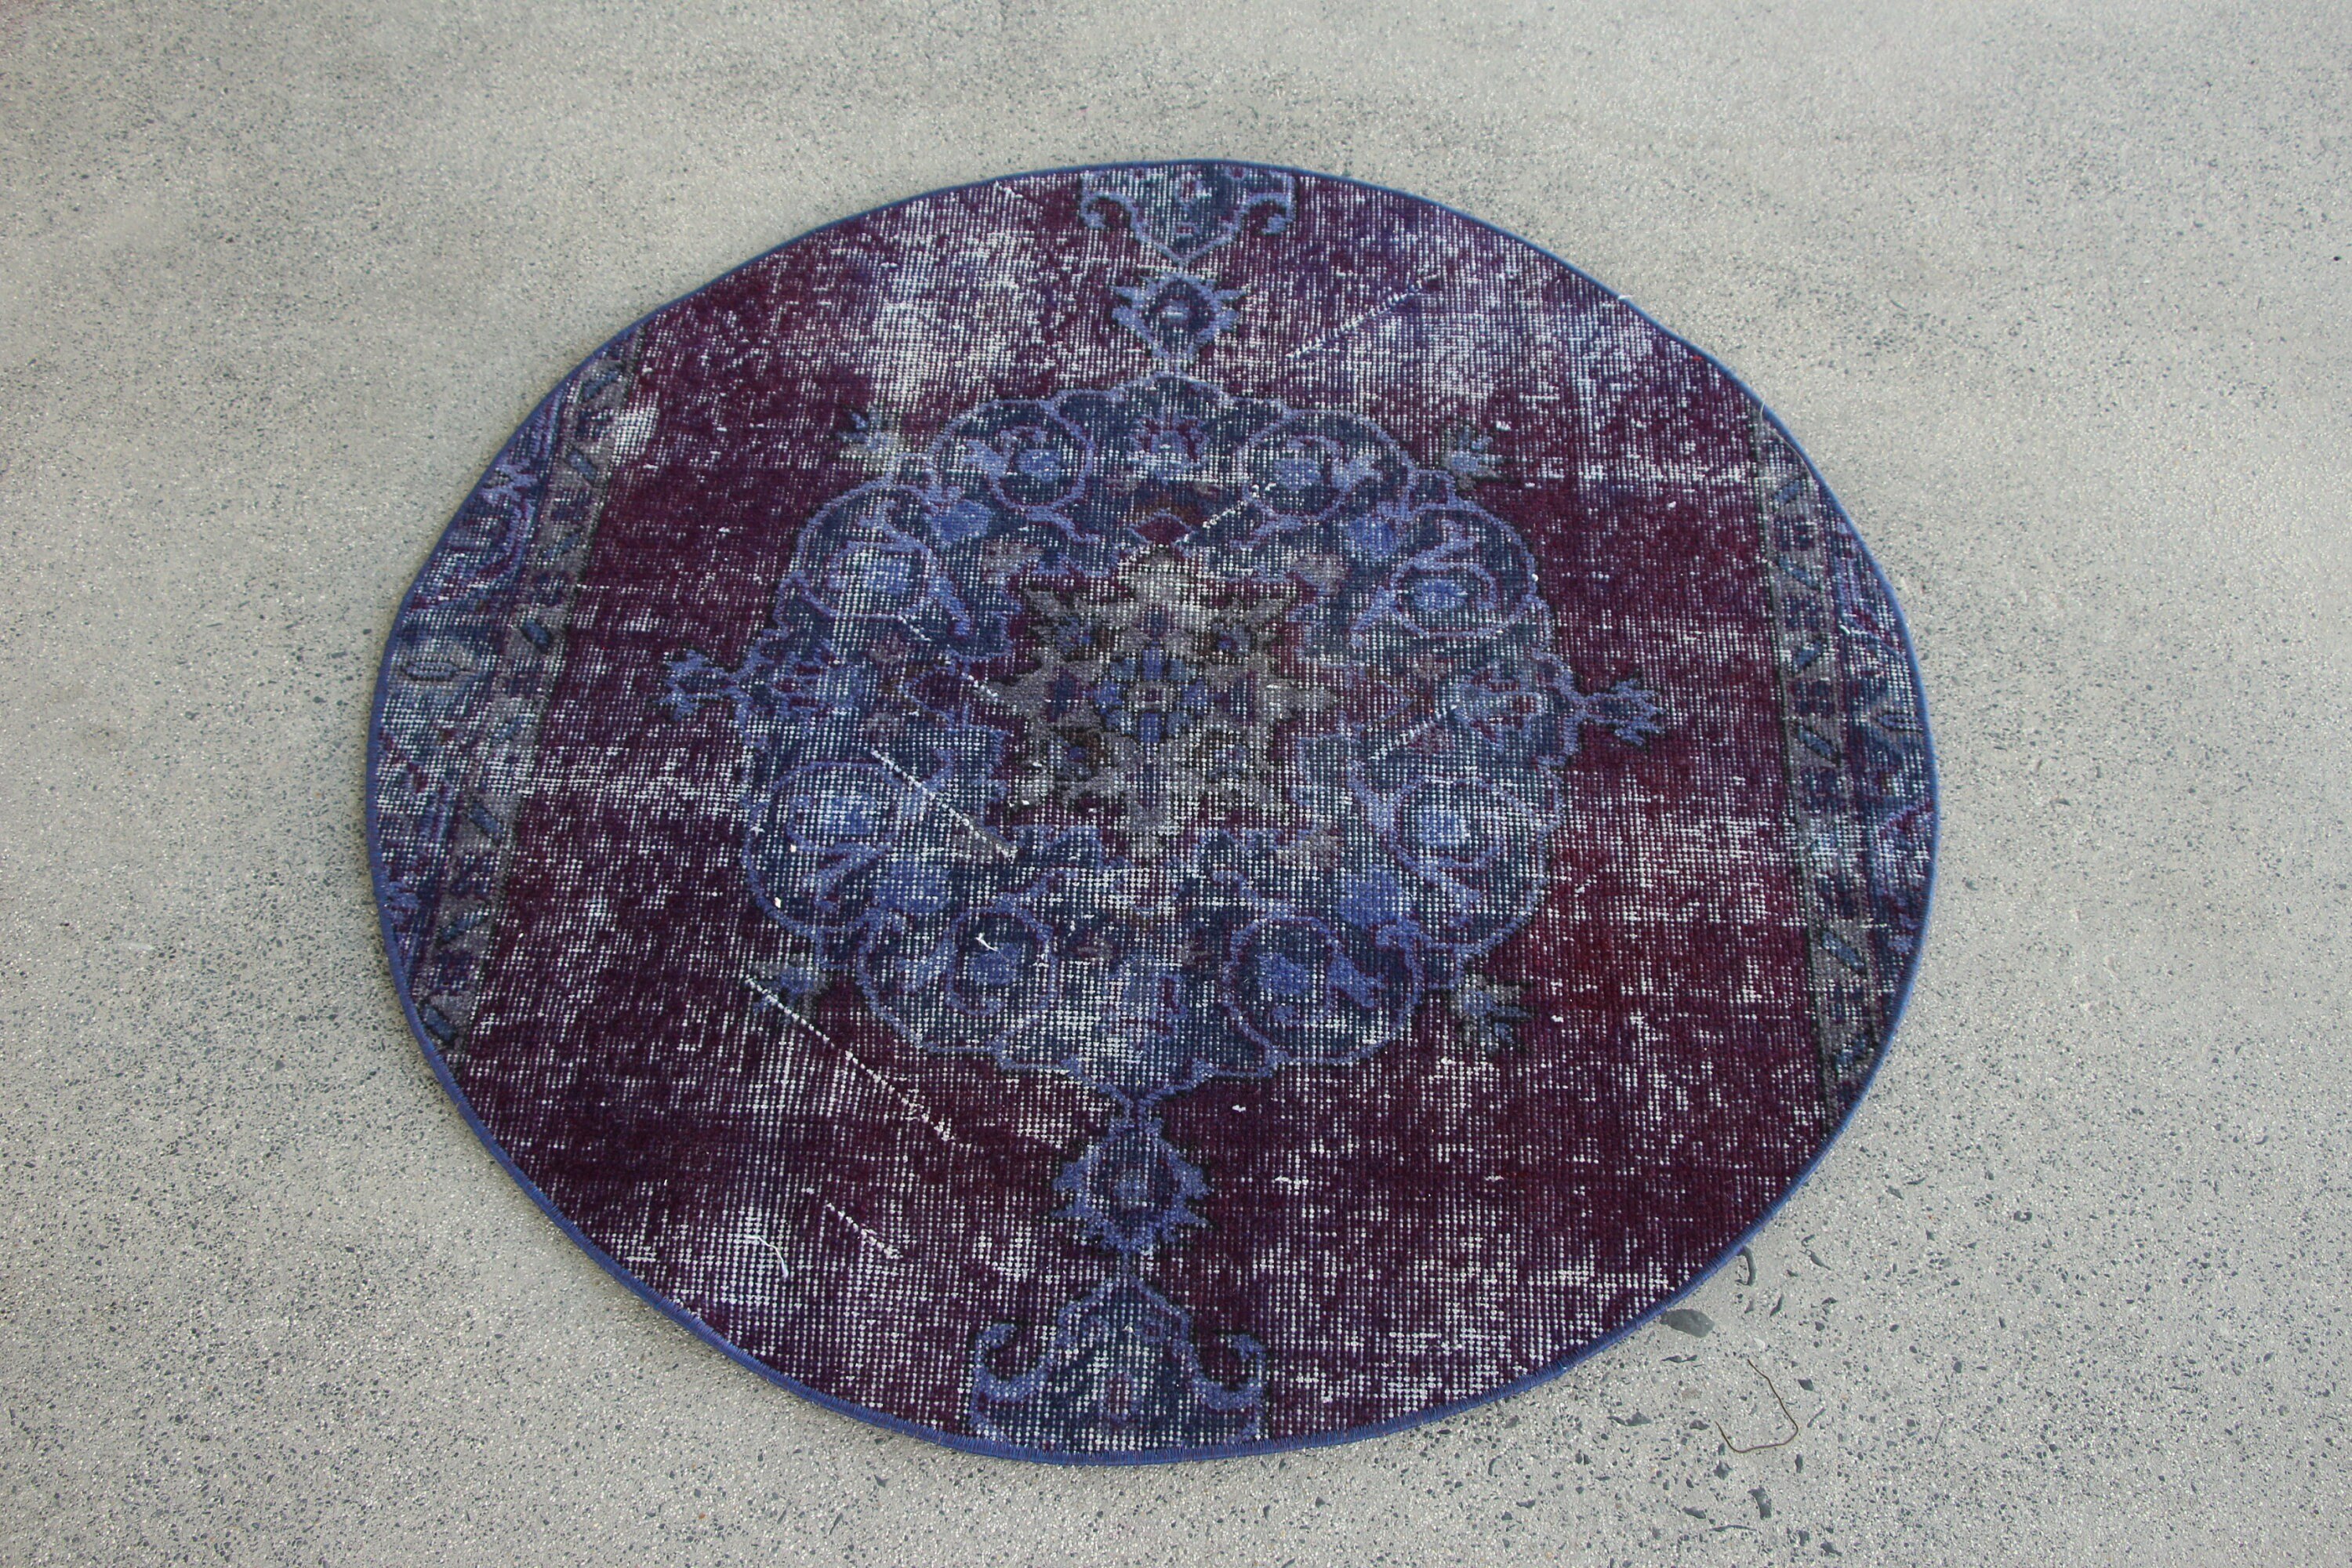 Purple Kitchen Rugs, 3.2x3.3 ft Small Rug, Car Mat Rug, Turkish Rugs, Oushak Rugs, Rugs for Kitchen, Vintage Rug, Cool Rug, Bath Rug